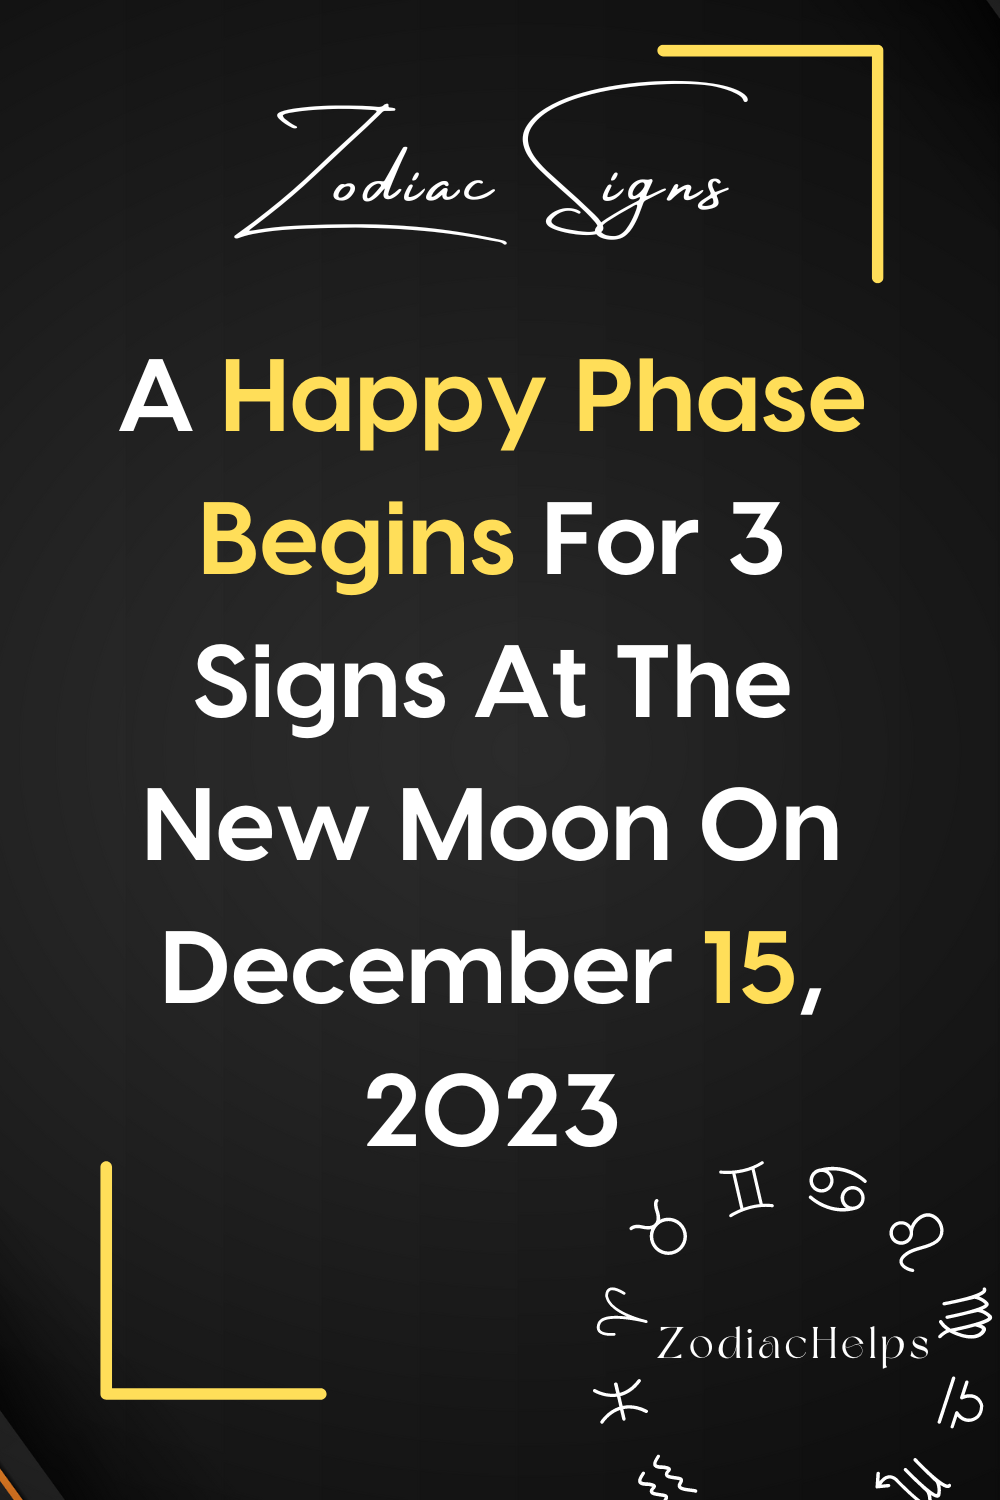 A Happy Phase Begins For 3 Signs At The New Moon On December 15, 2023